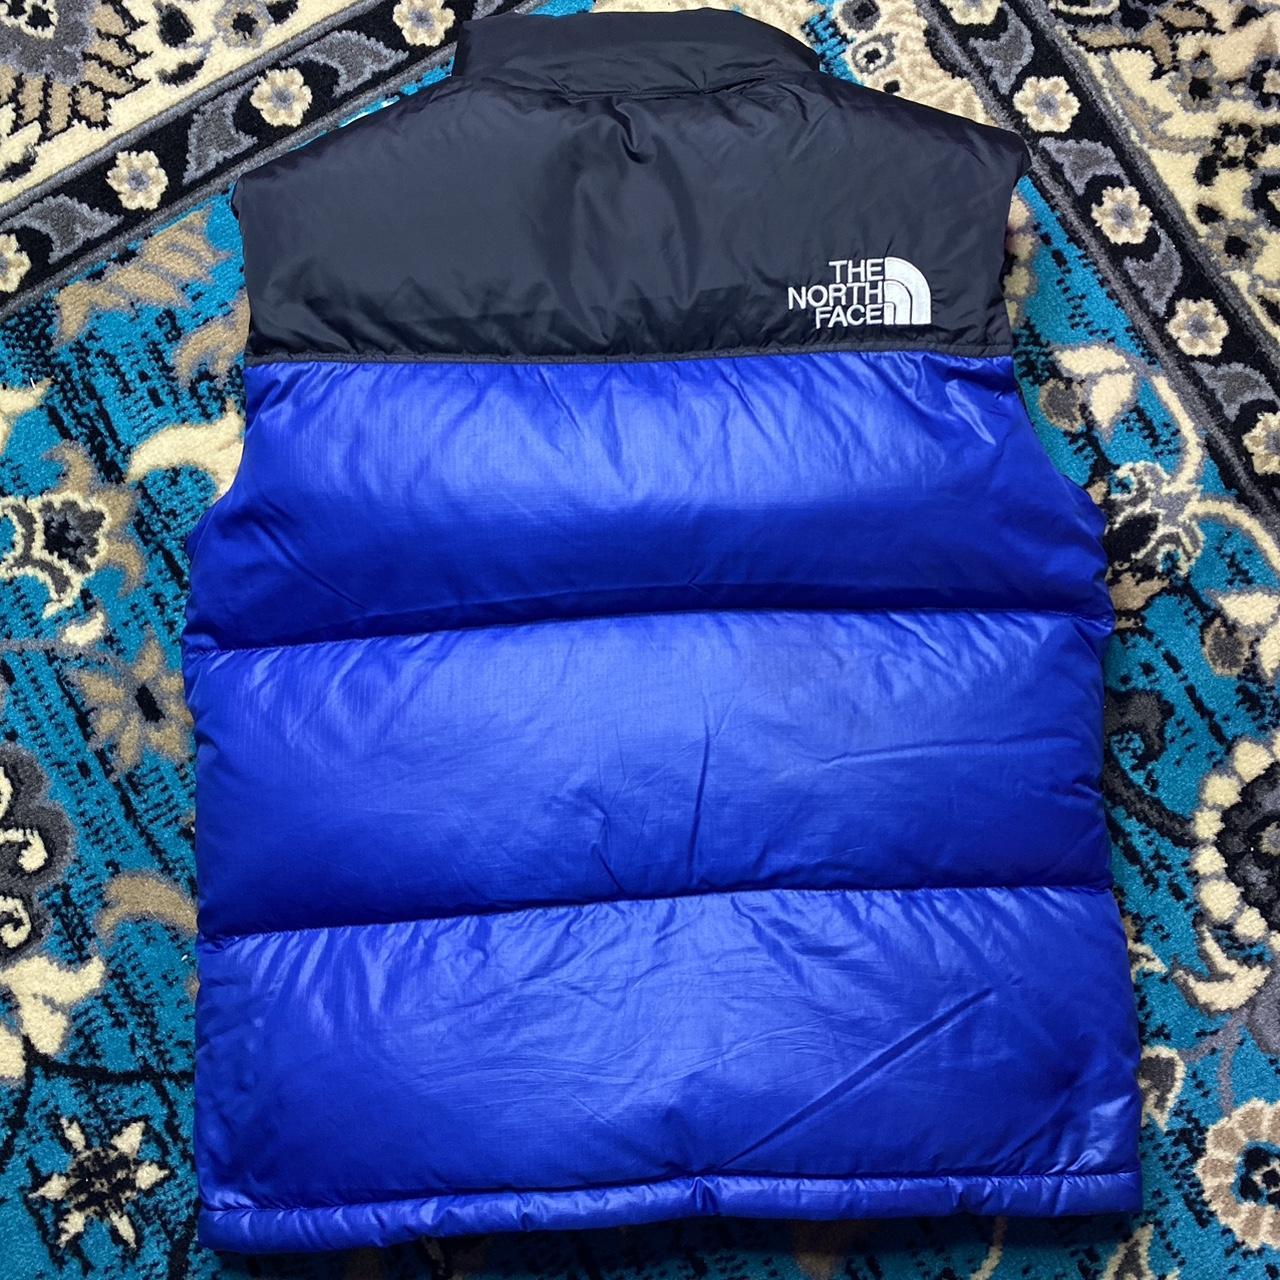 The North Face Men's Blue and Black Gilet (2)